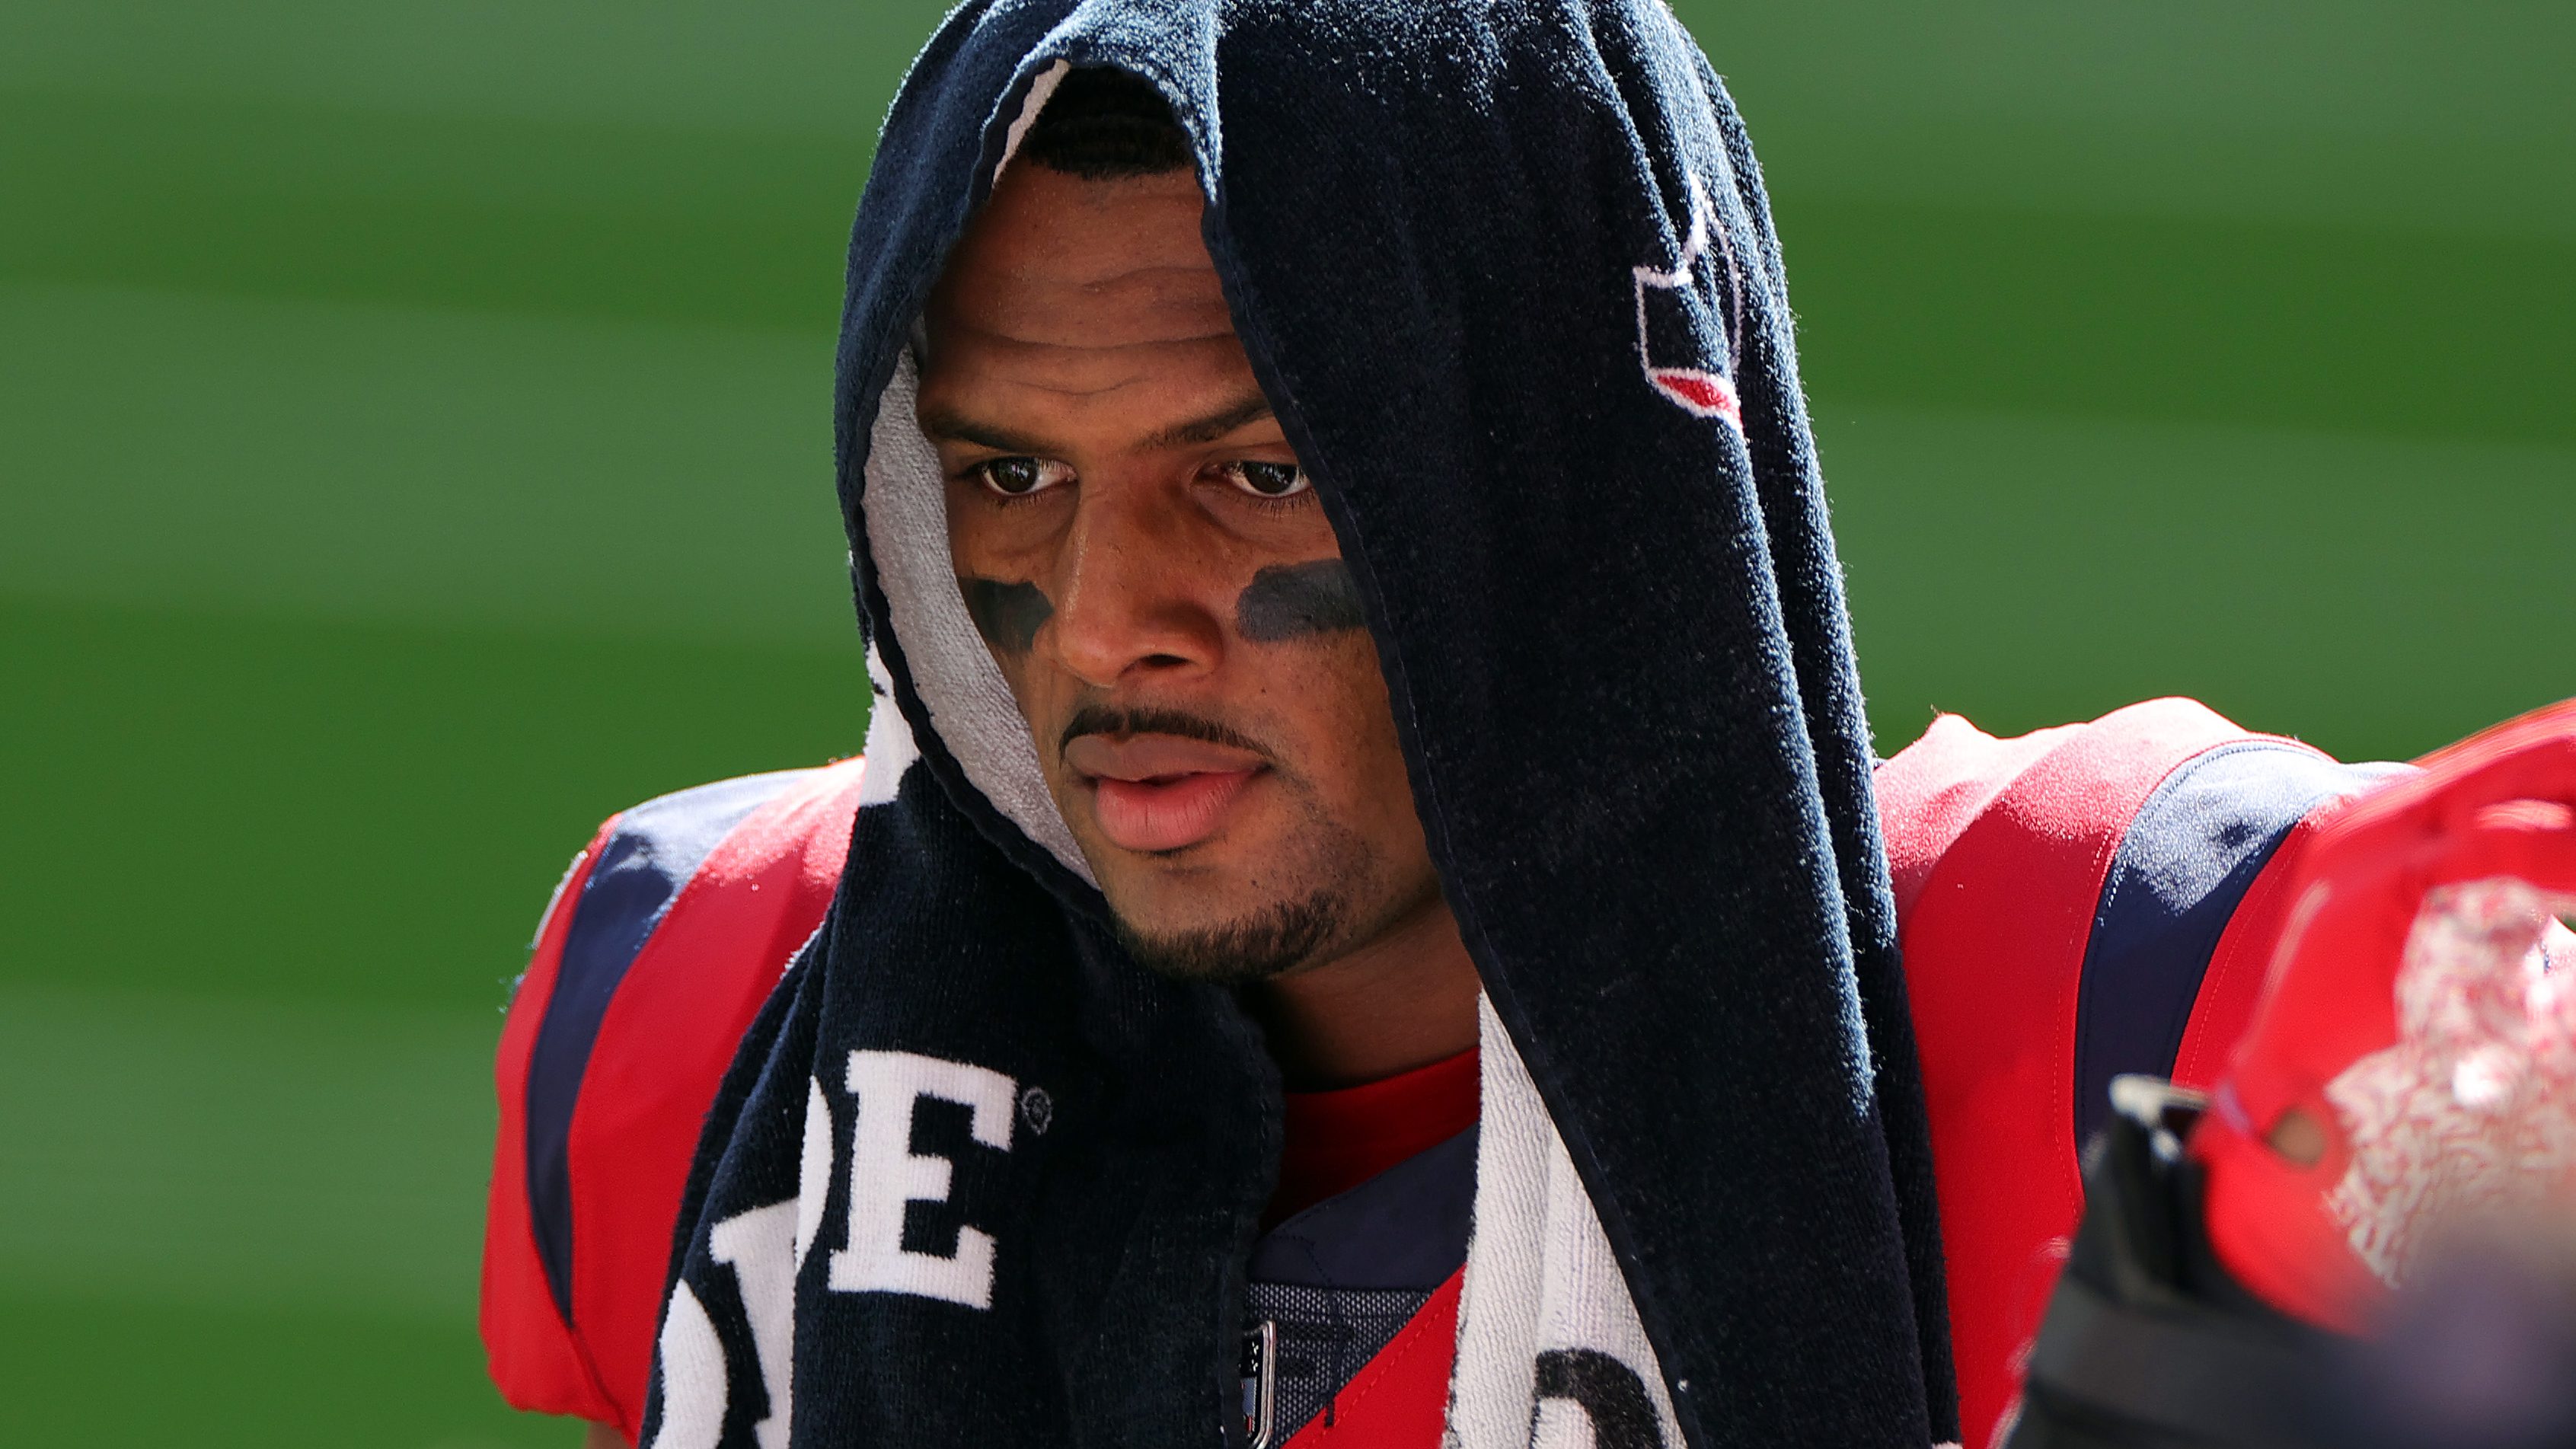 Deshaun Watson #4 of the Houston Texans reacts during the first half against the Indianapolis Colts at NRG Stadium on December 06, 2020 in Houston, Texas.